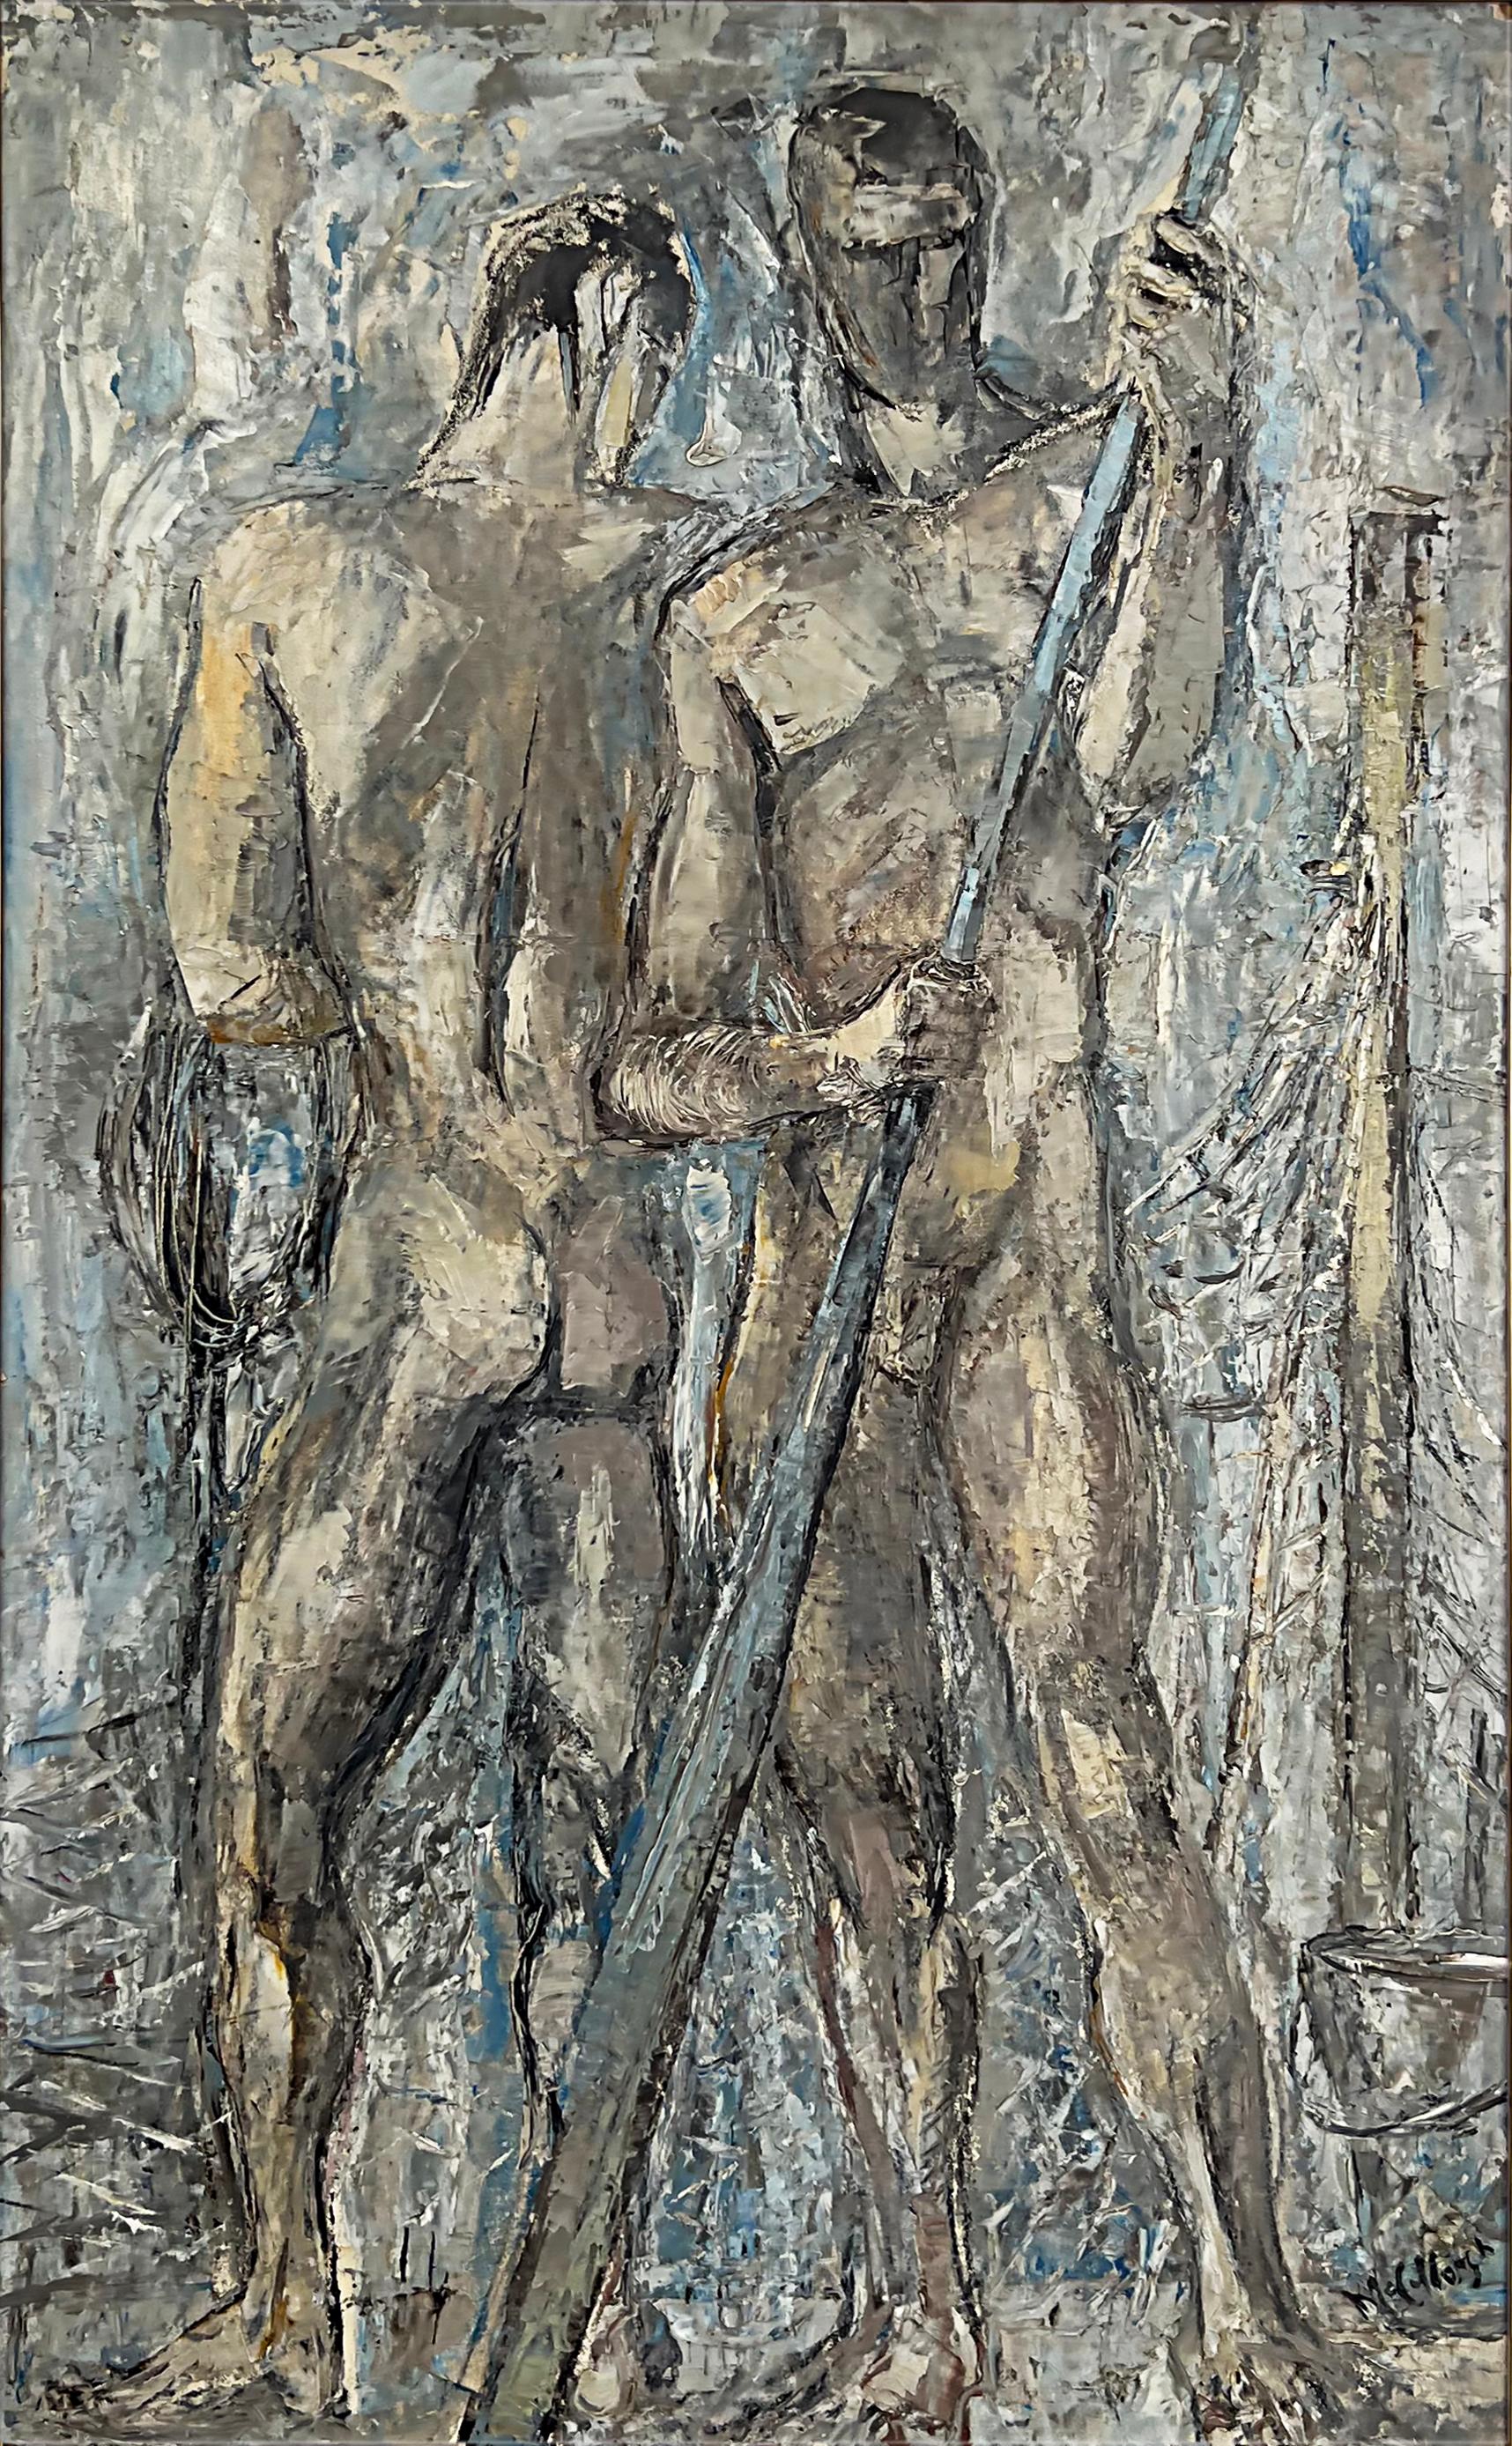 Offered for sale is a 1950s impressionist abstract painting of male nudes by the accomplished listed American artist Suzanne McCullough Plowden (1916-2018). The oil painting on board is titled the Fisherman and has a great composition with skillful